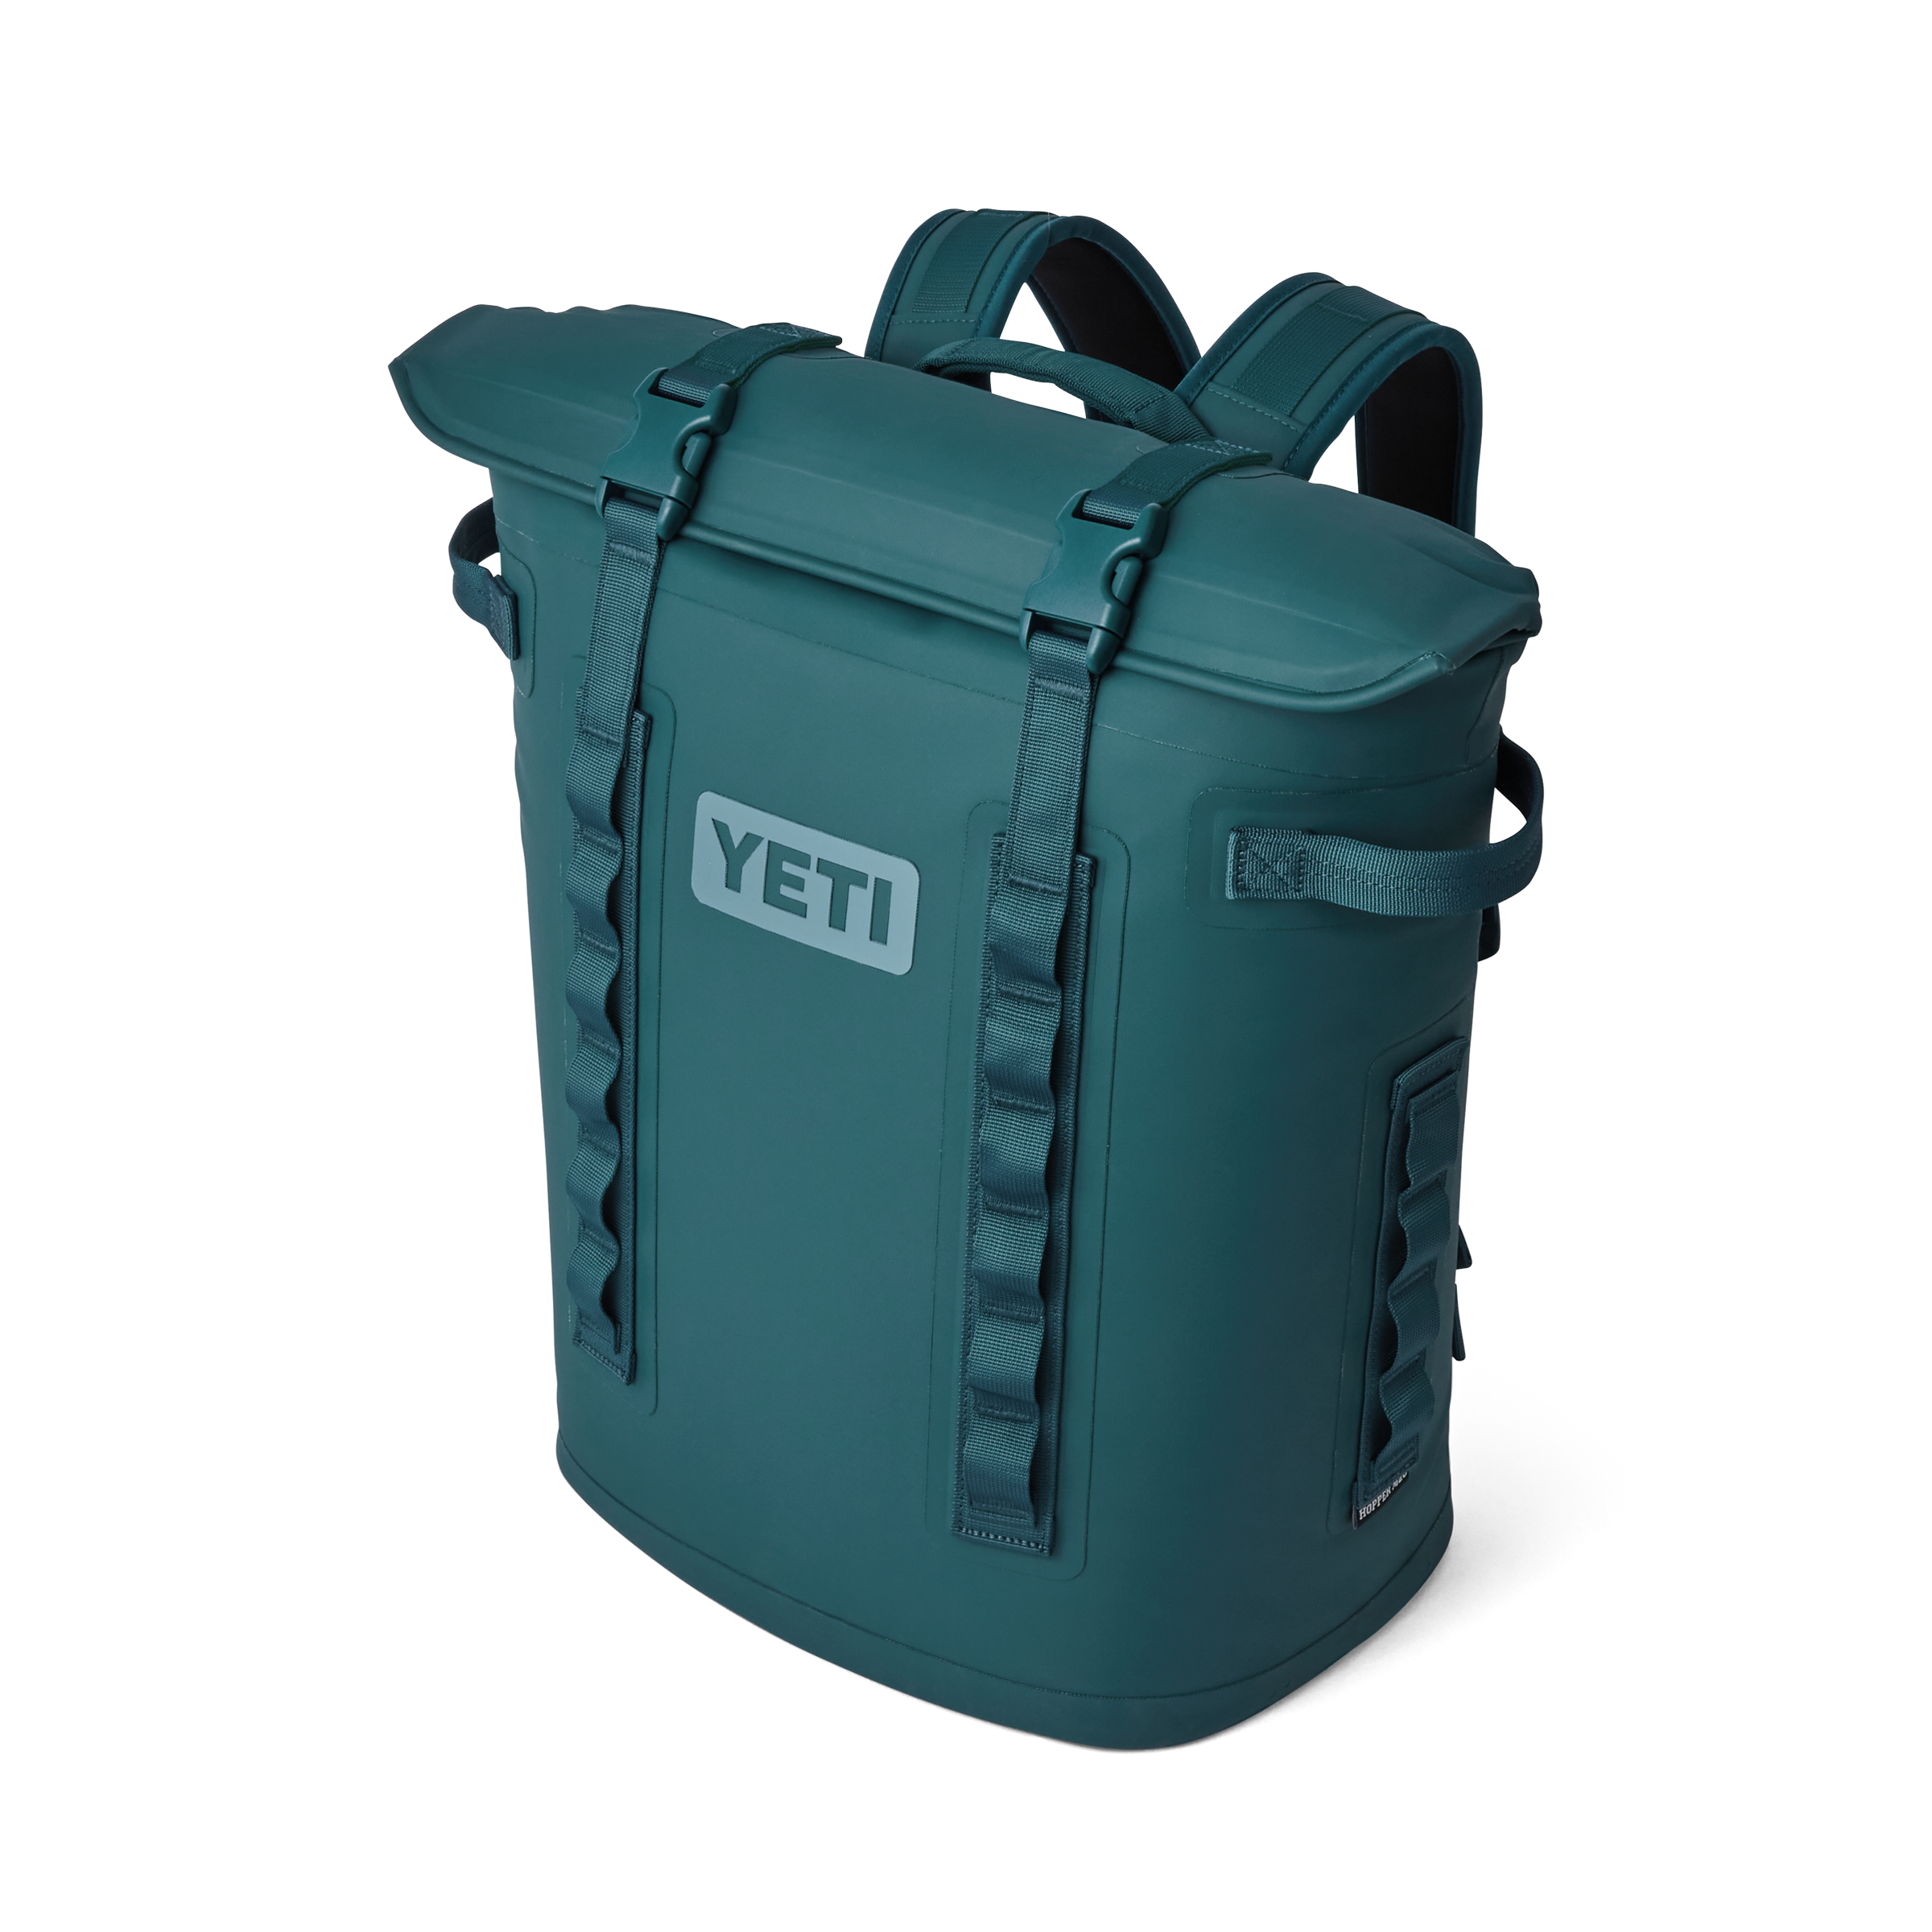 Yeti Hopper M20 2.5 Backpack - AGAVE TEAL - Mansfield Hunting & Fishing - Products to prepare for Corona Virus